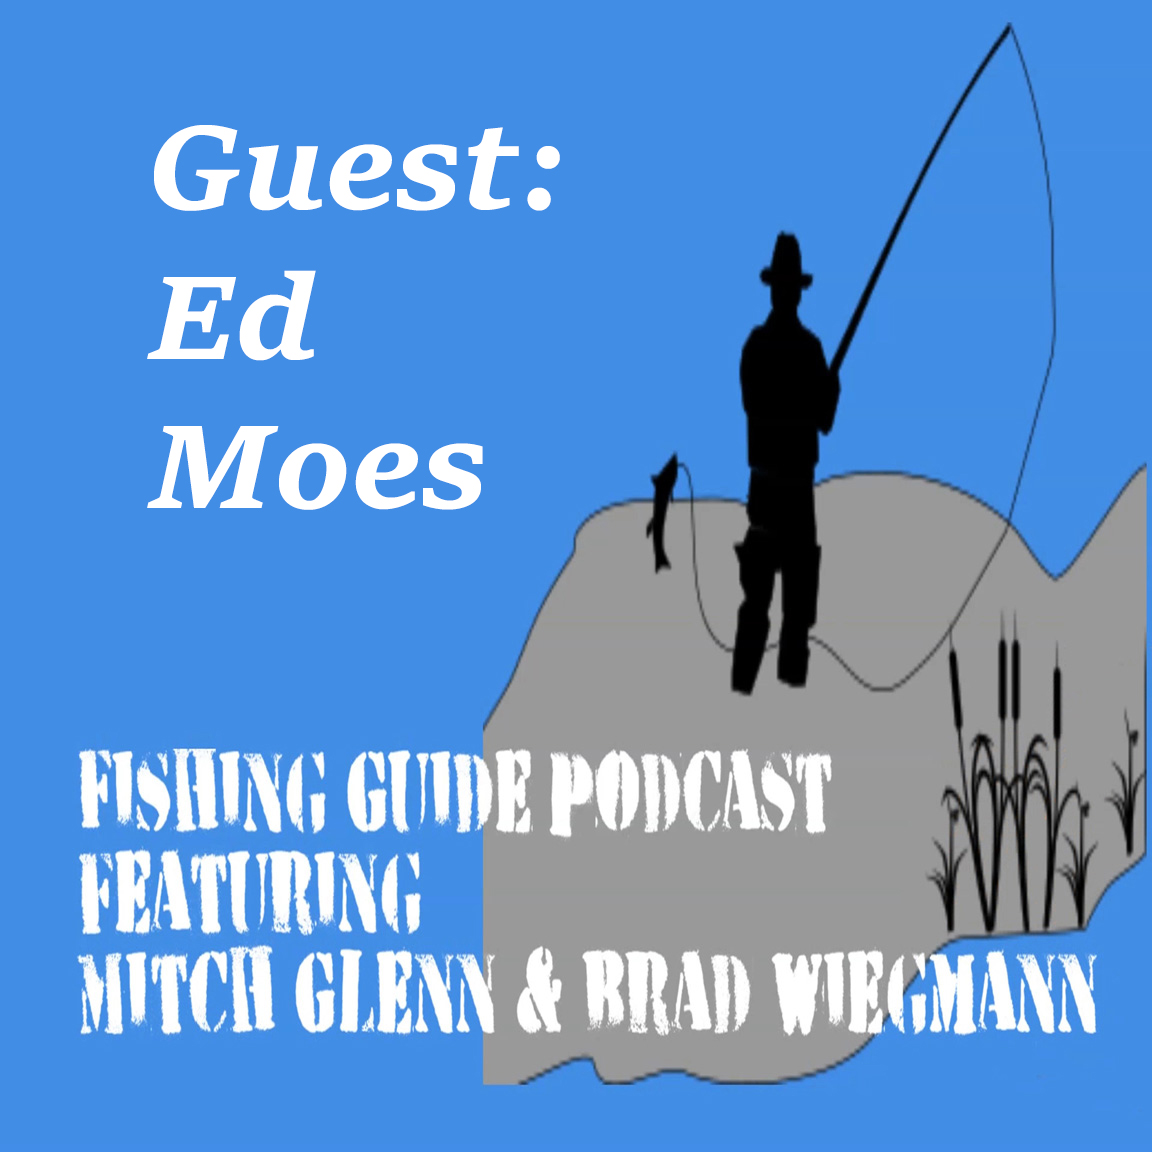 Ed Moes founder of Crappie.com website talks about current events in crappie fishing